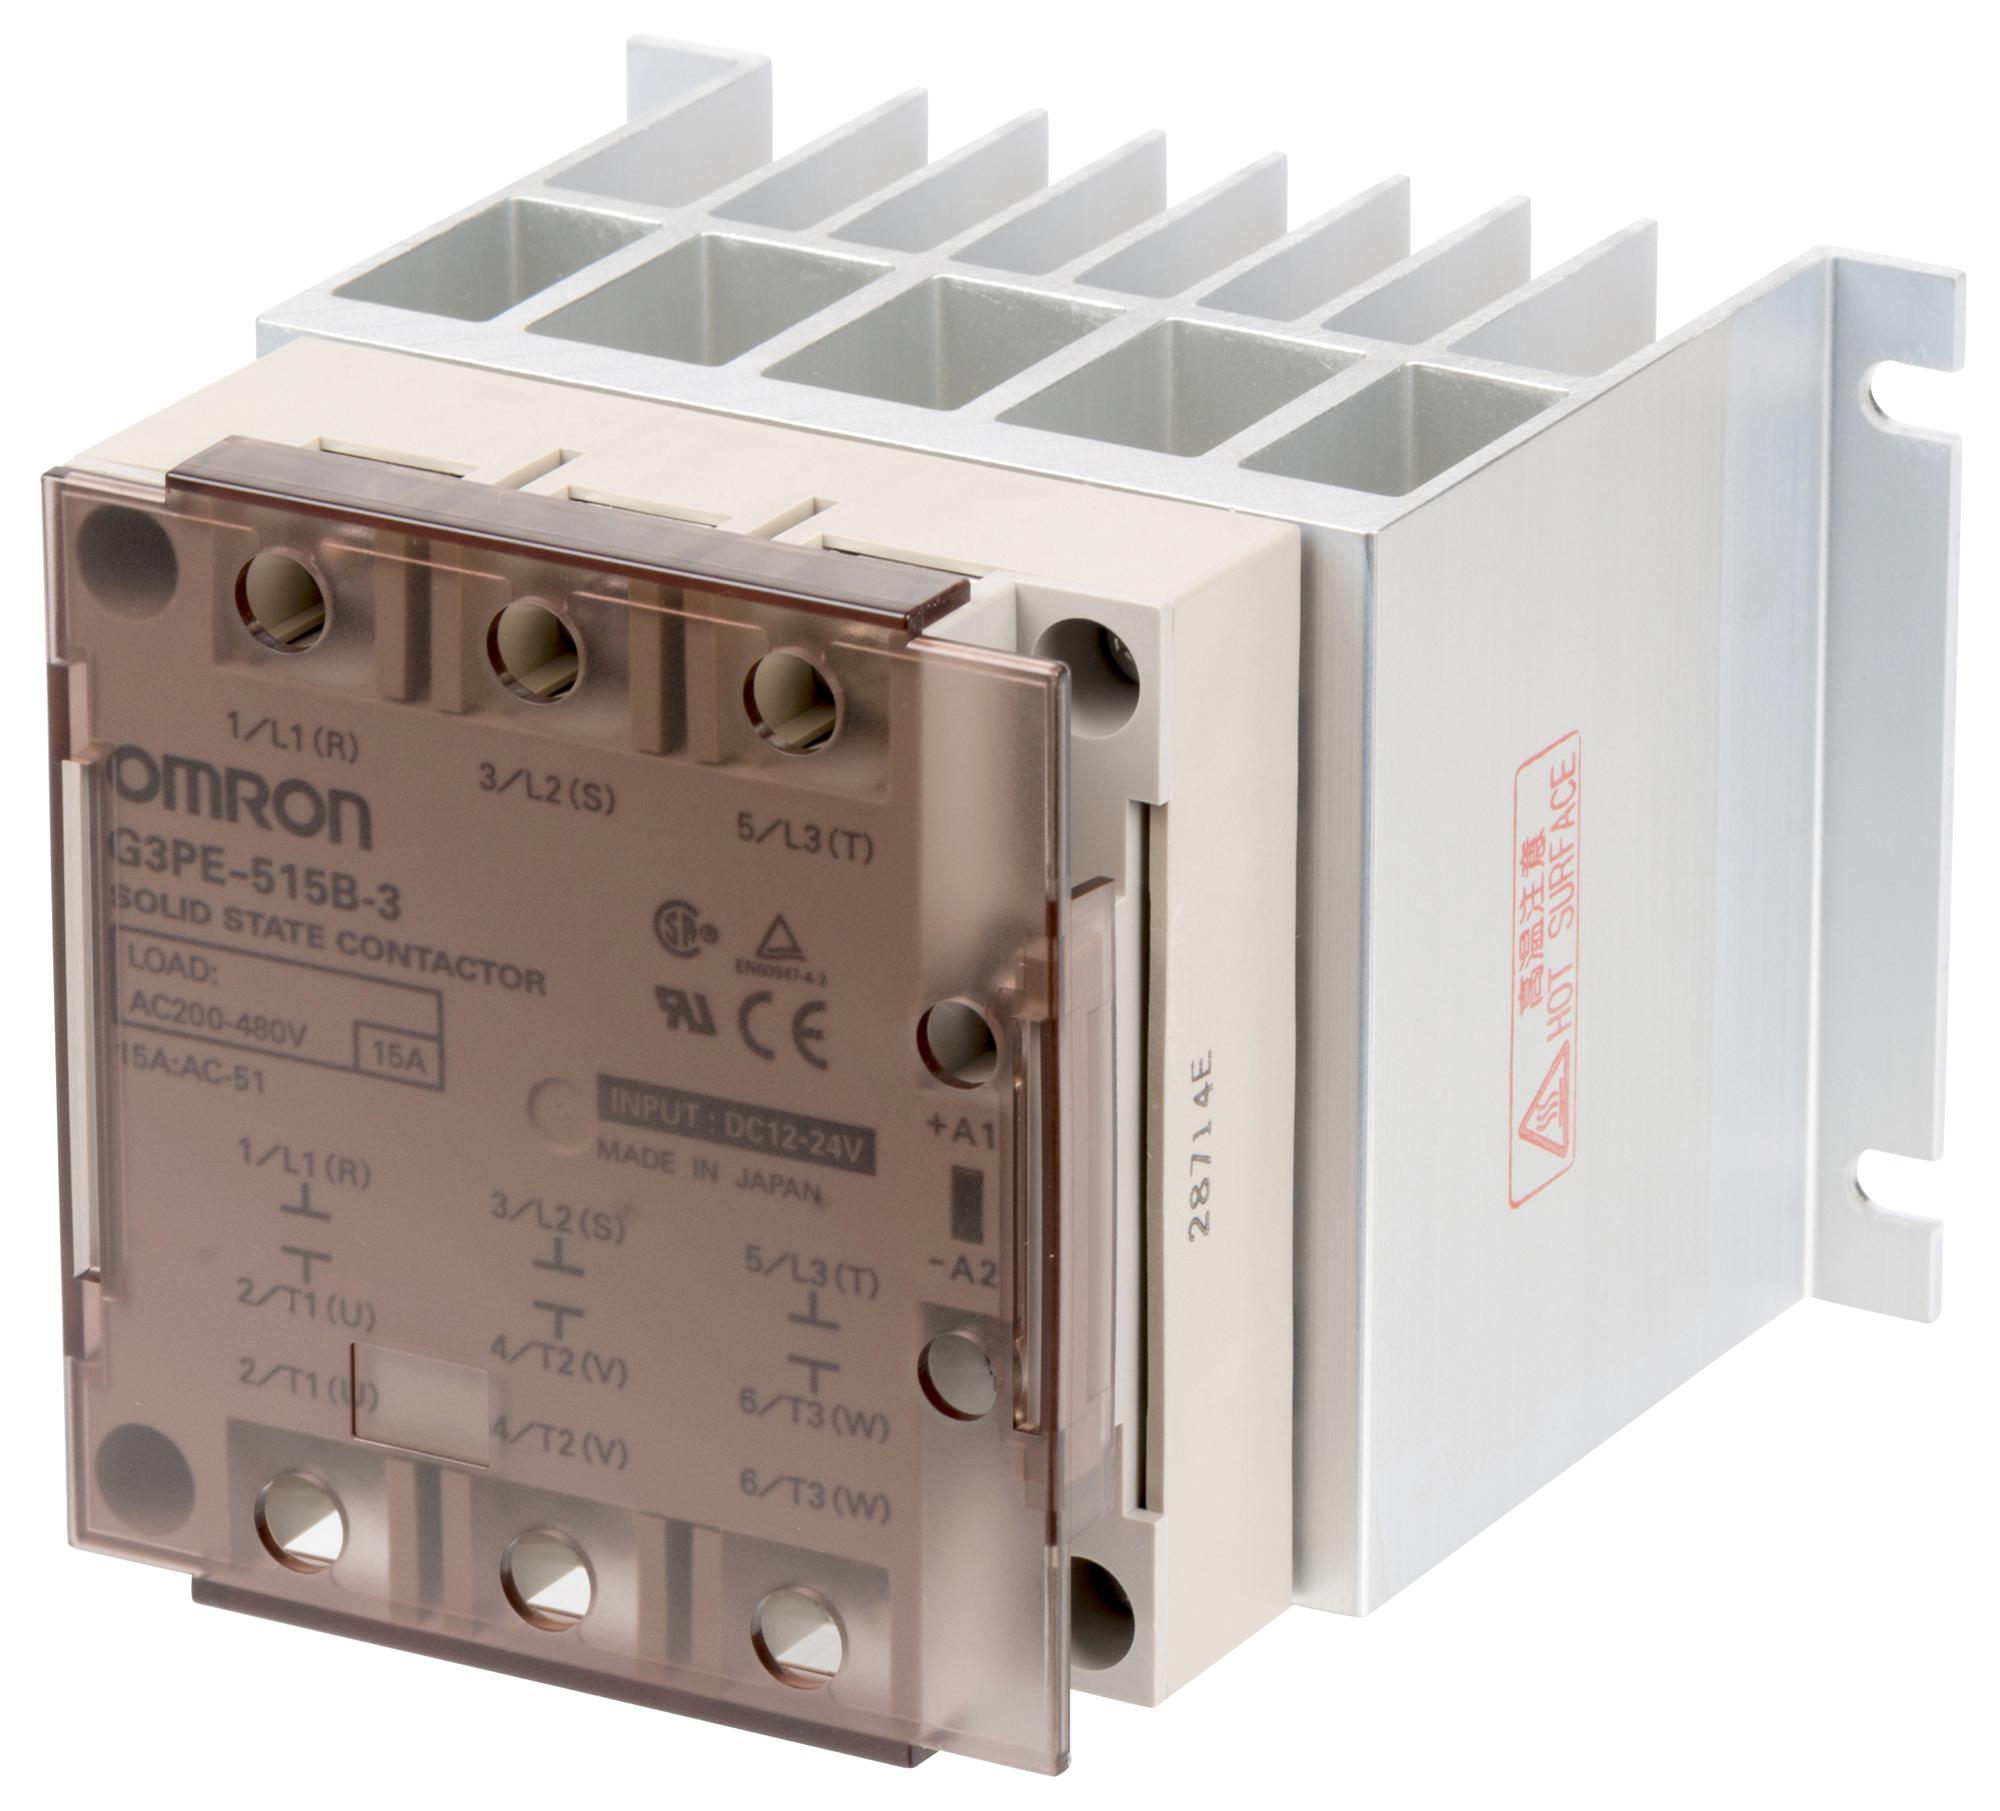 G3PE-515B-3 12-24VDC SOLID STATE RELAYS OMRON